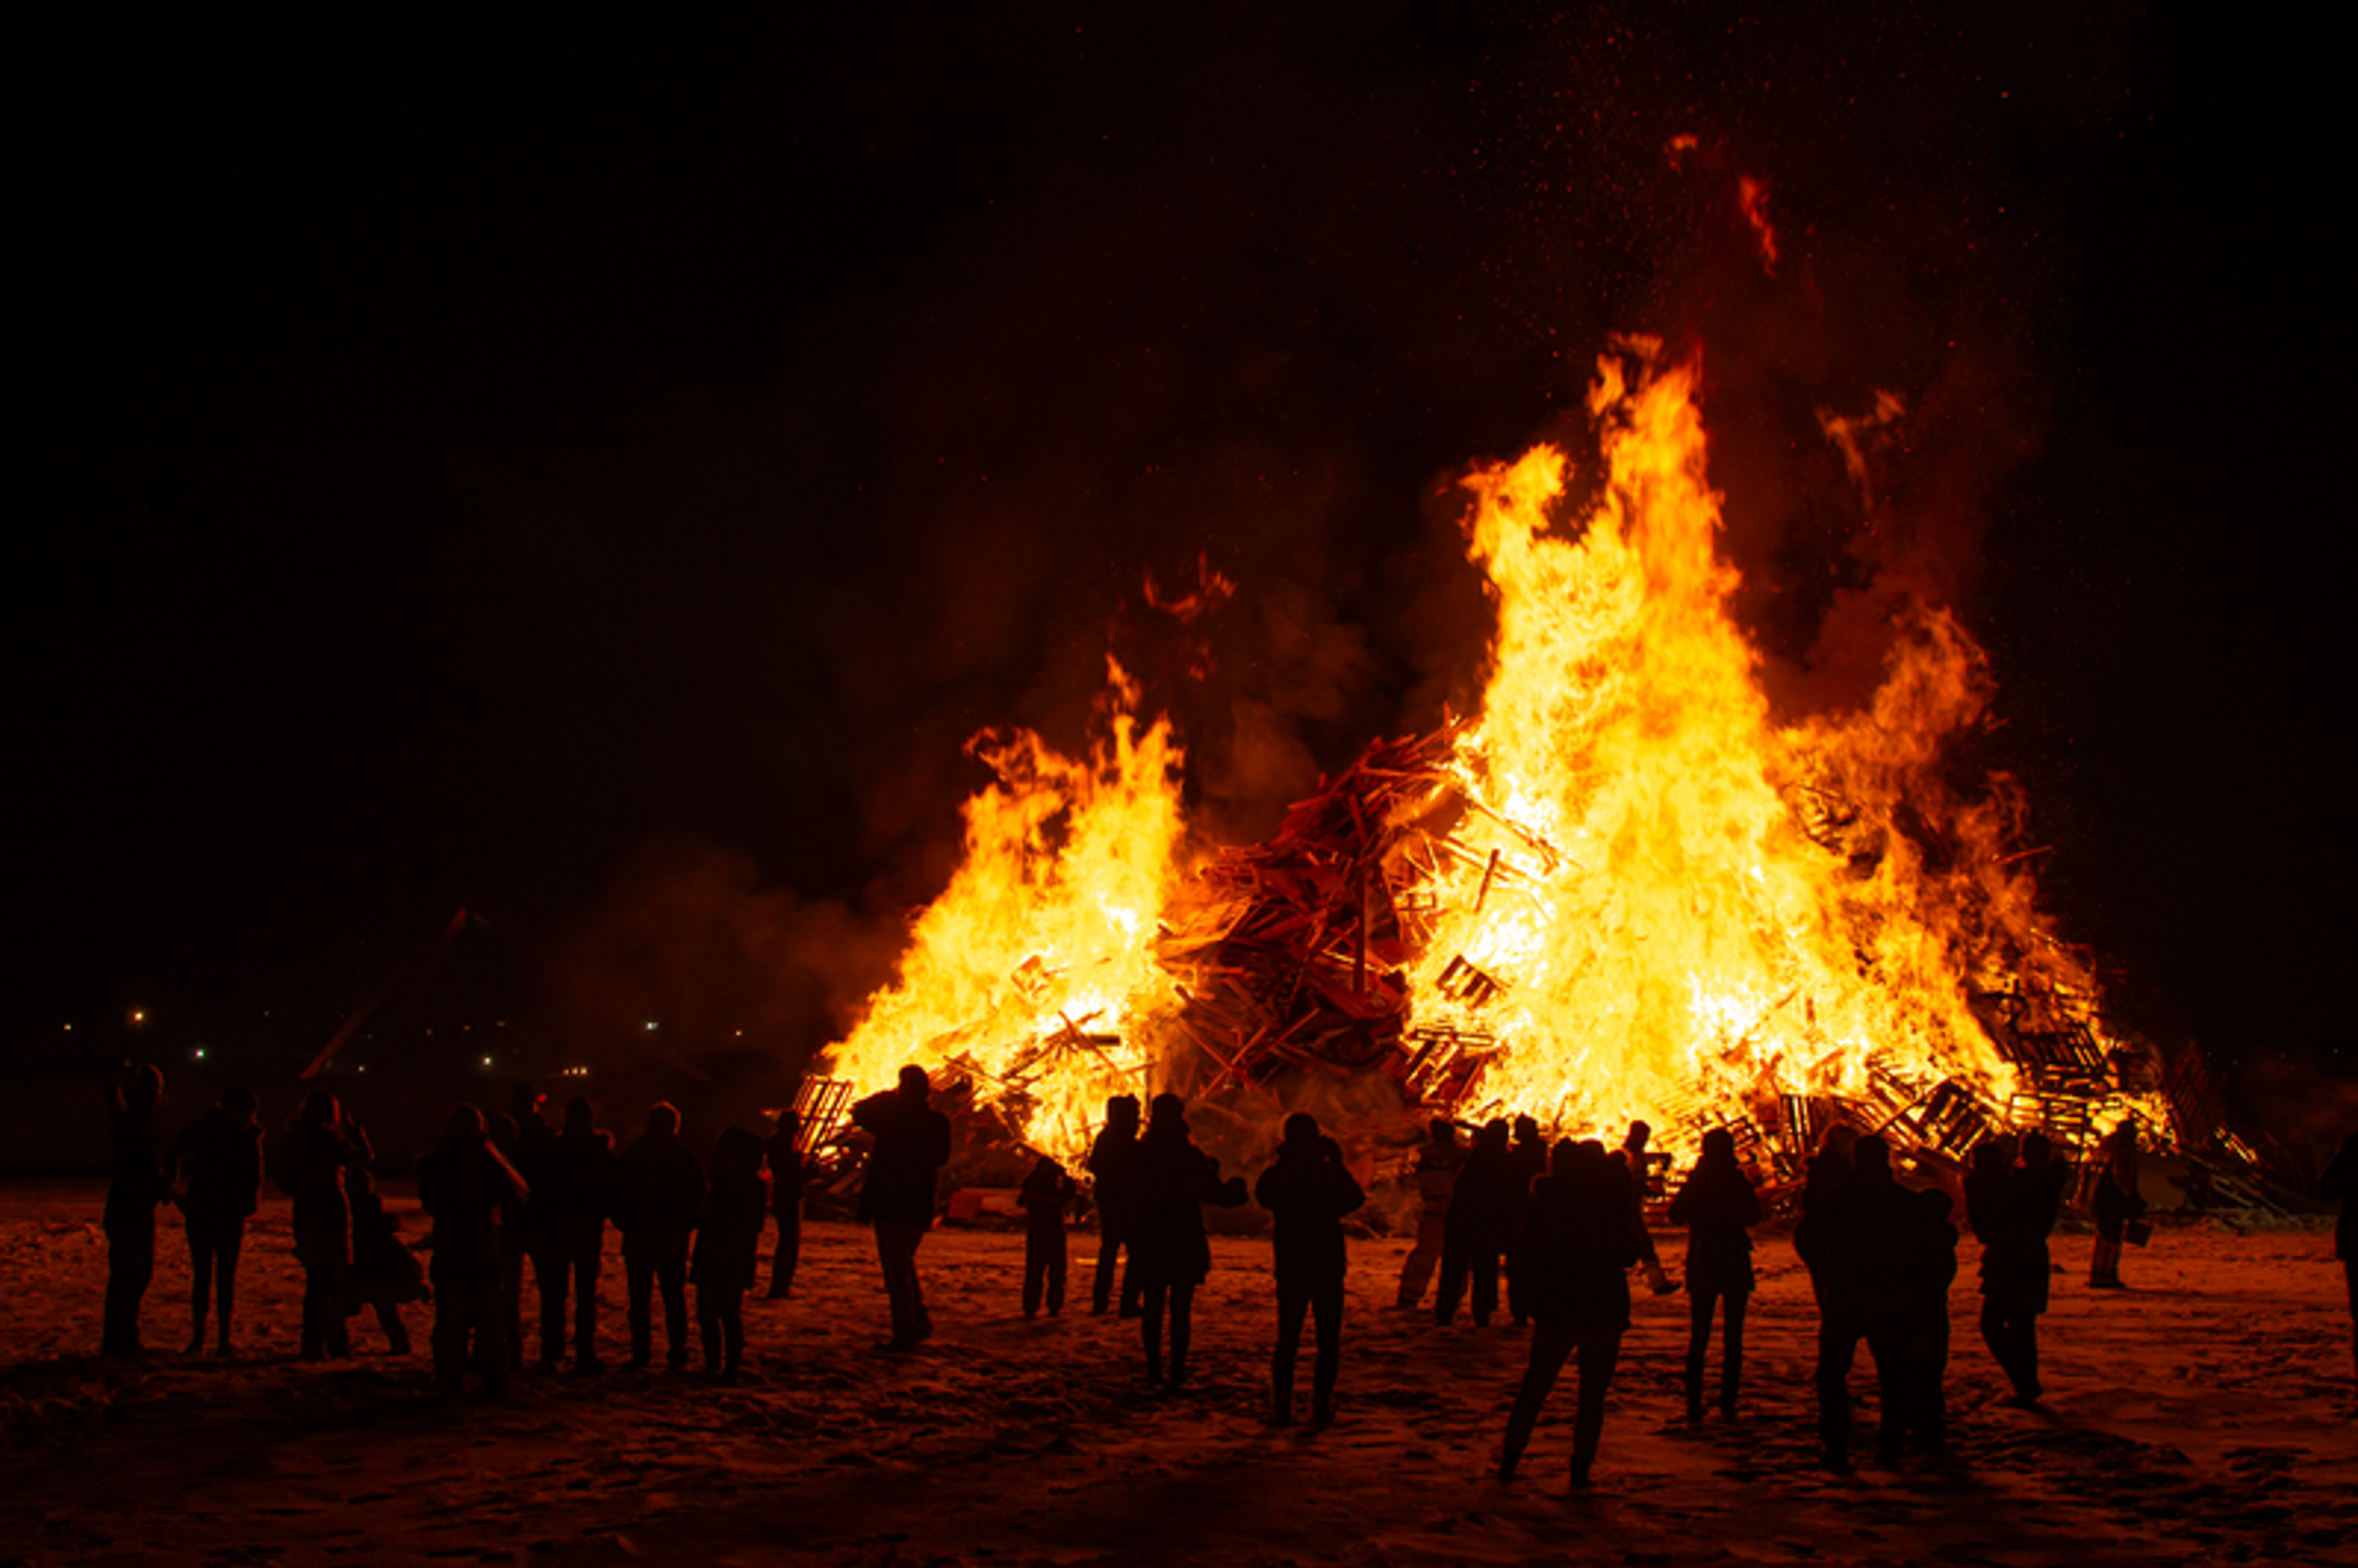 A group of people gathered around a large bonfire at night, watching the flames rise into the dark sky.